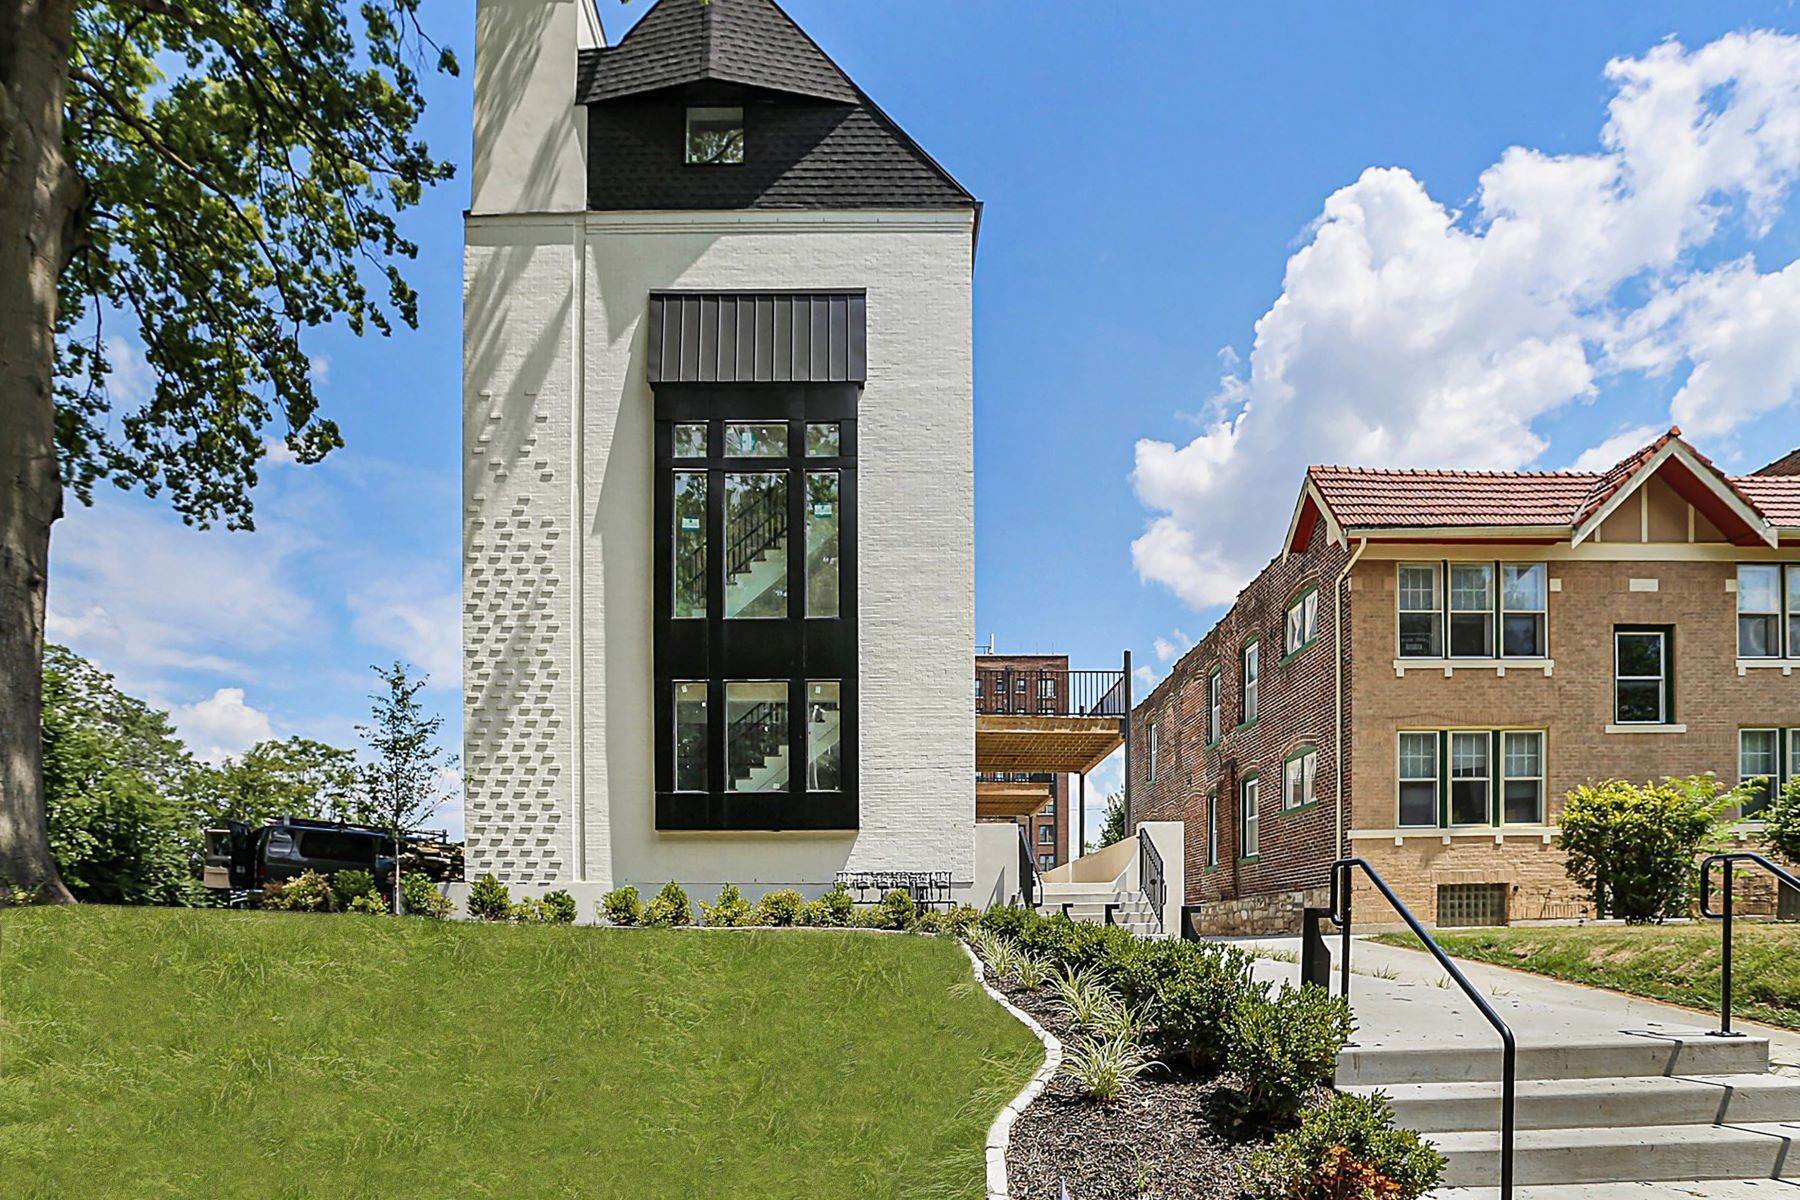 1. Townhouse for Sale at West Village Townhomes - 102 4201 West Pine Boulevard #102 St. Louis, Missouri 63108 United States